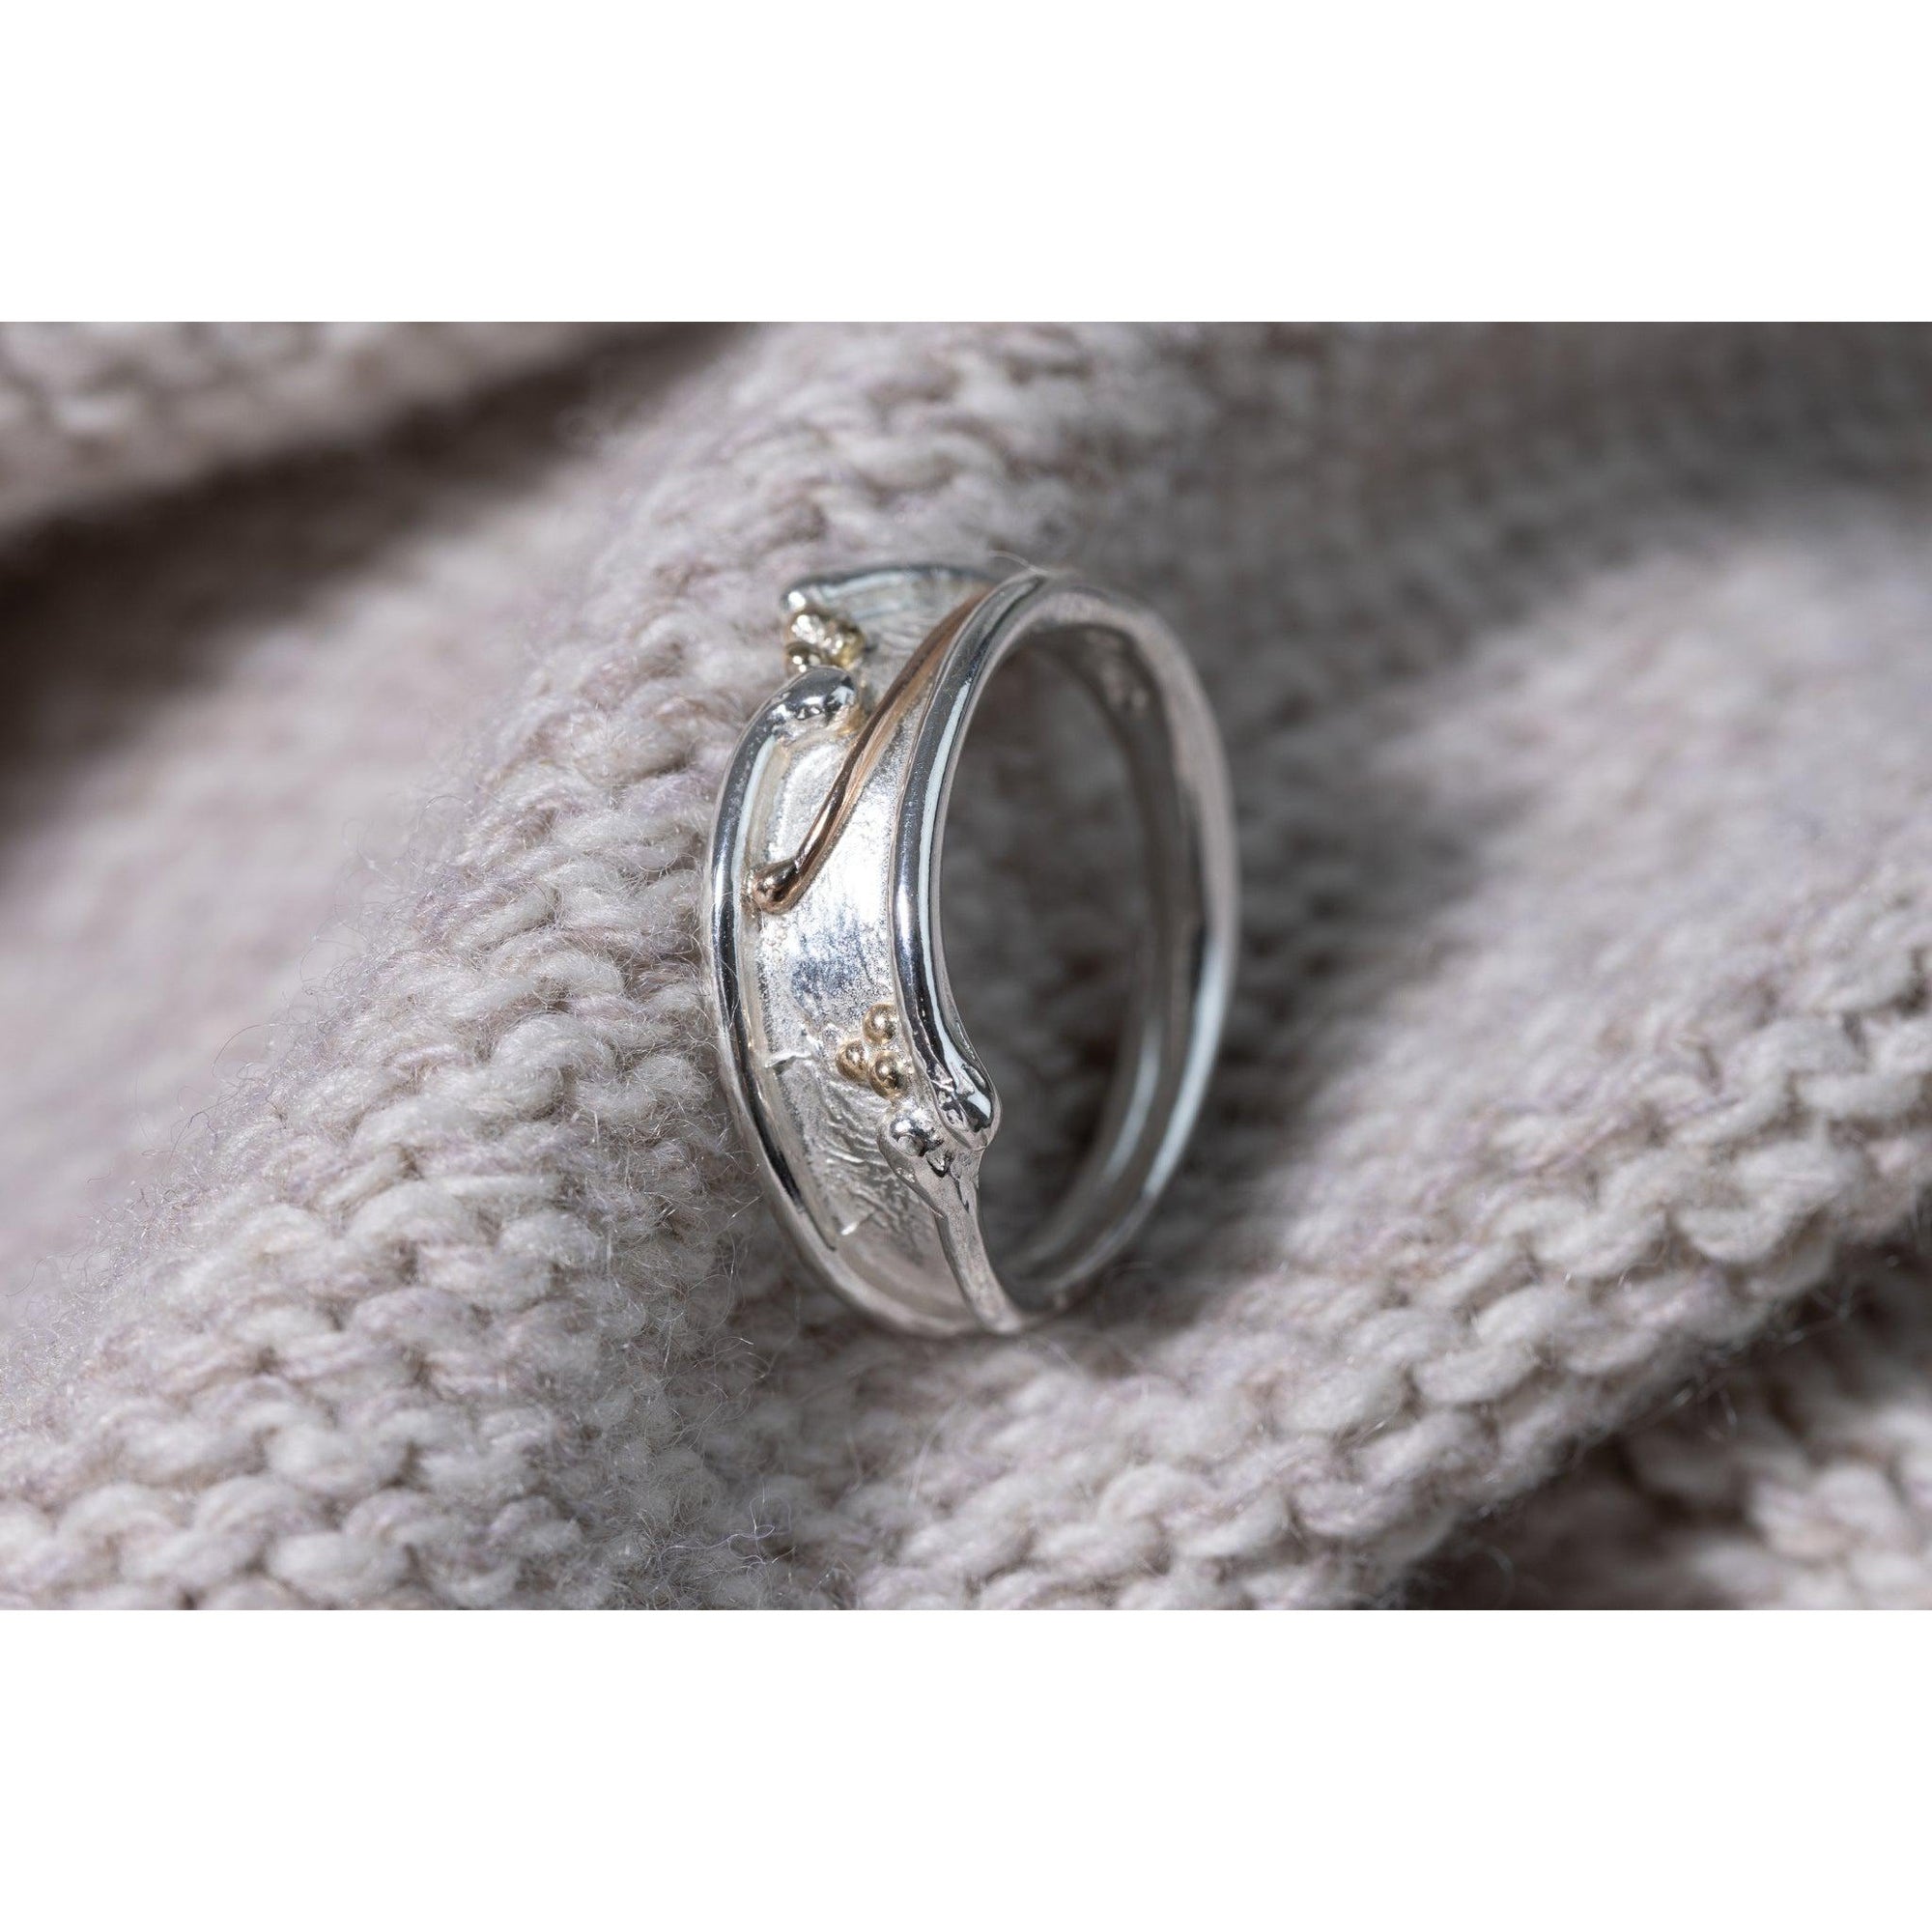 'LG54 - Silver Ring with 9ct Gold' by Les Grimshaw, available at Padstow Gallery, Cornwall